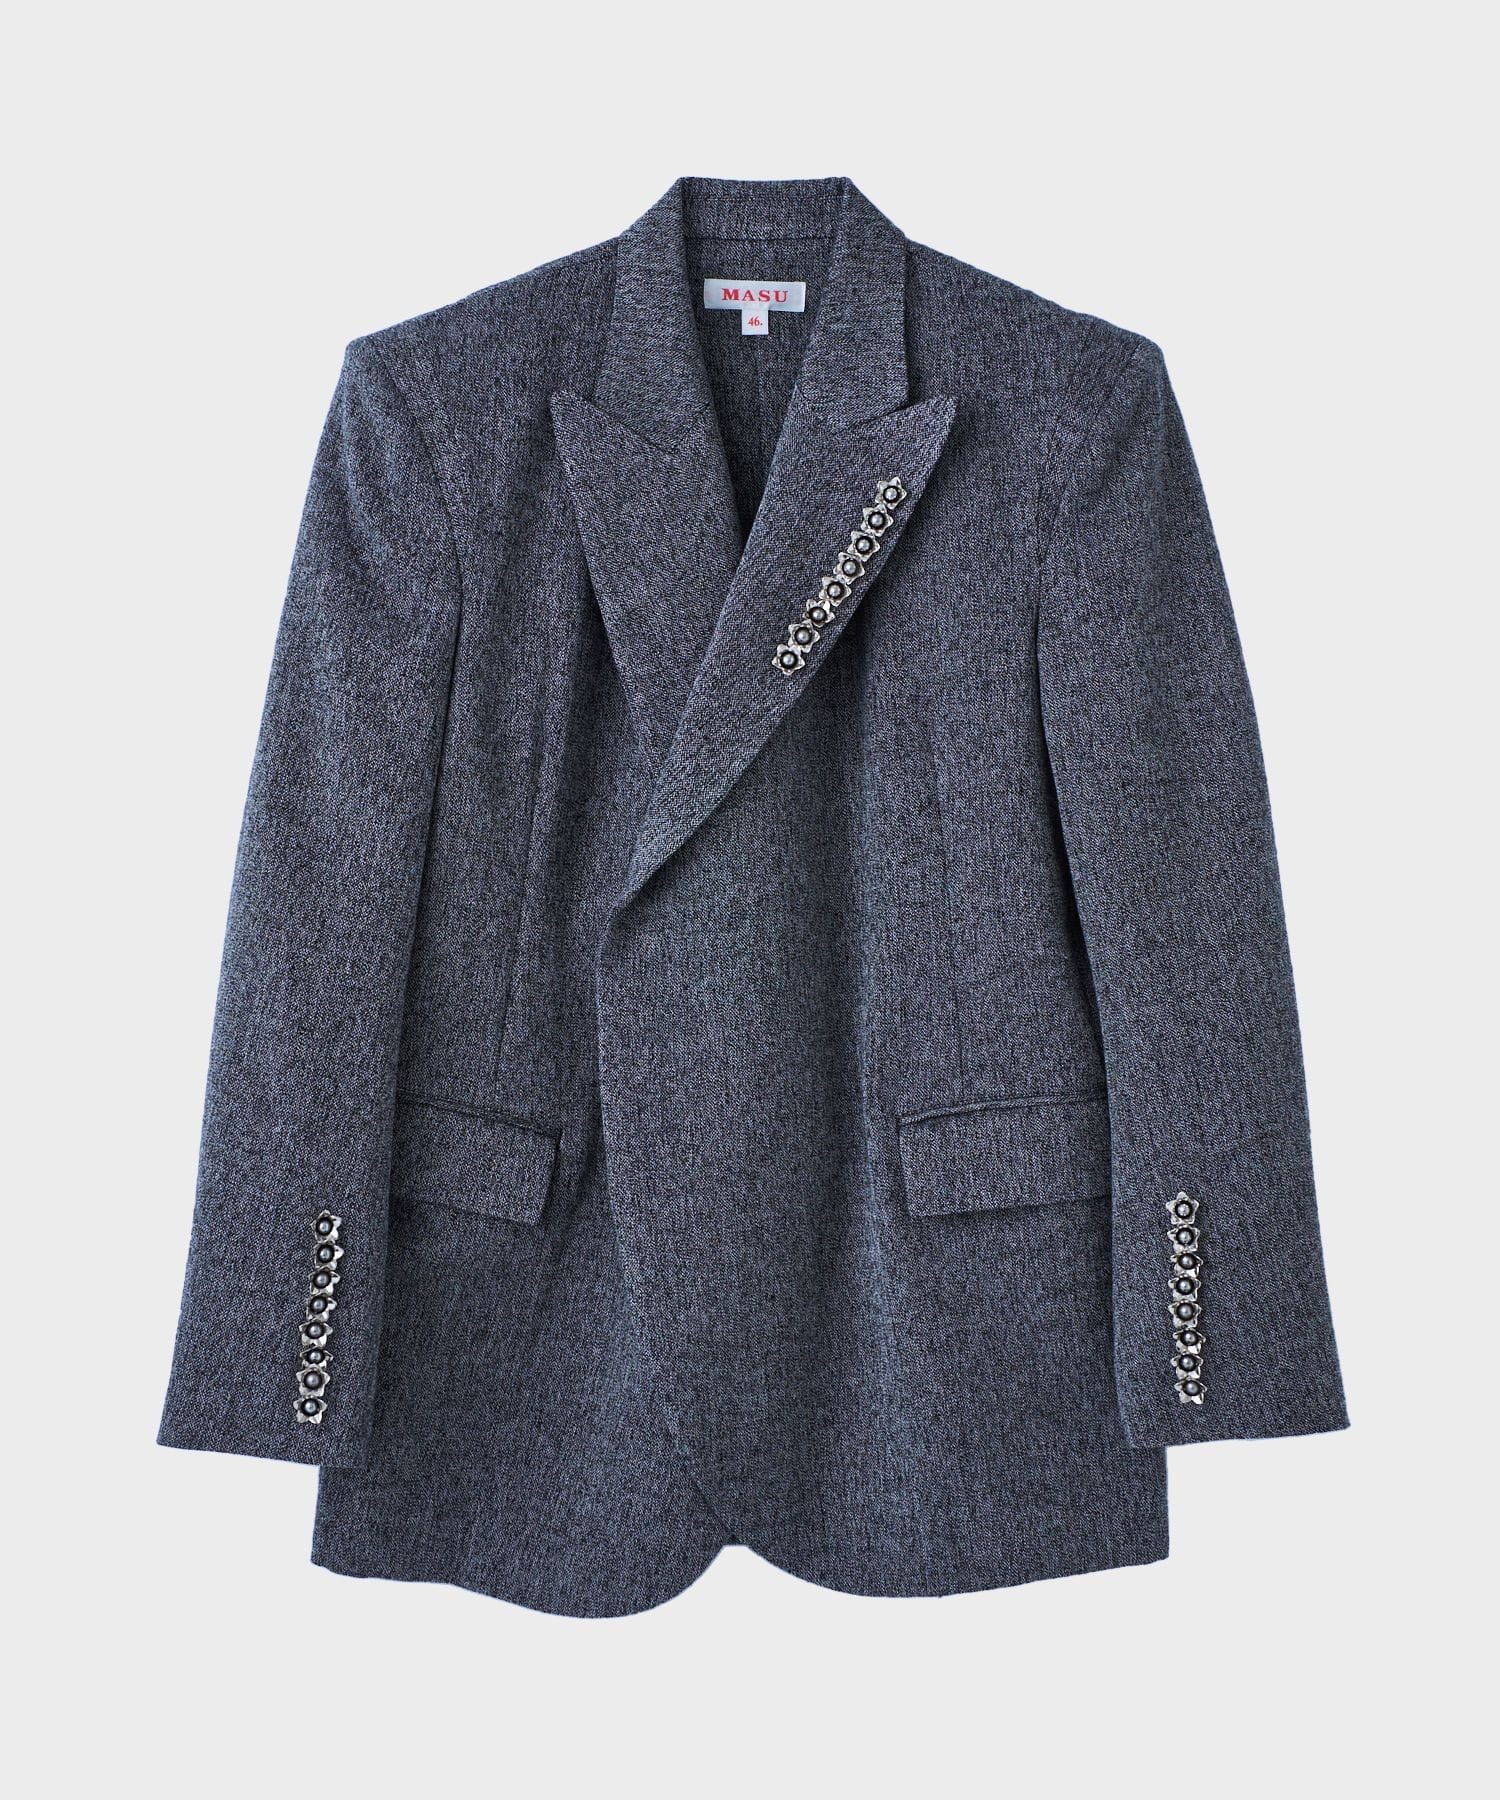 LOST TAILORED JACKET